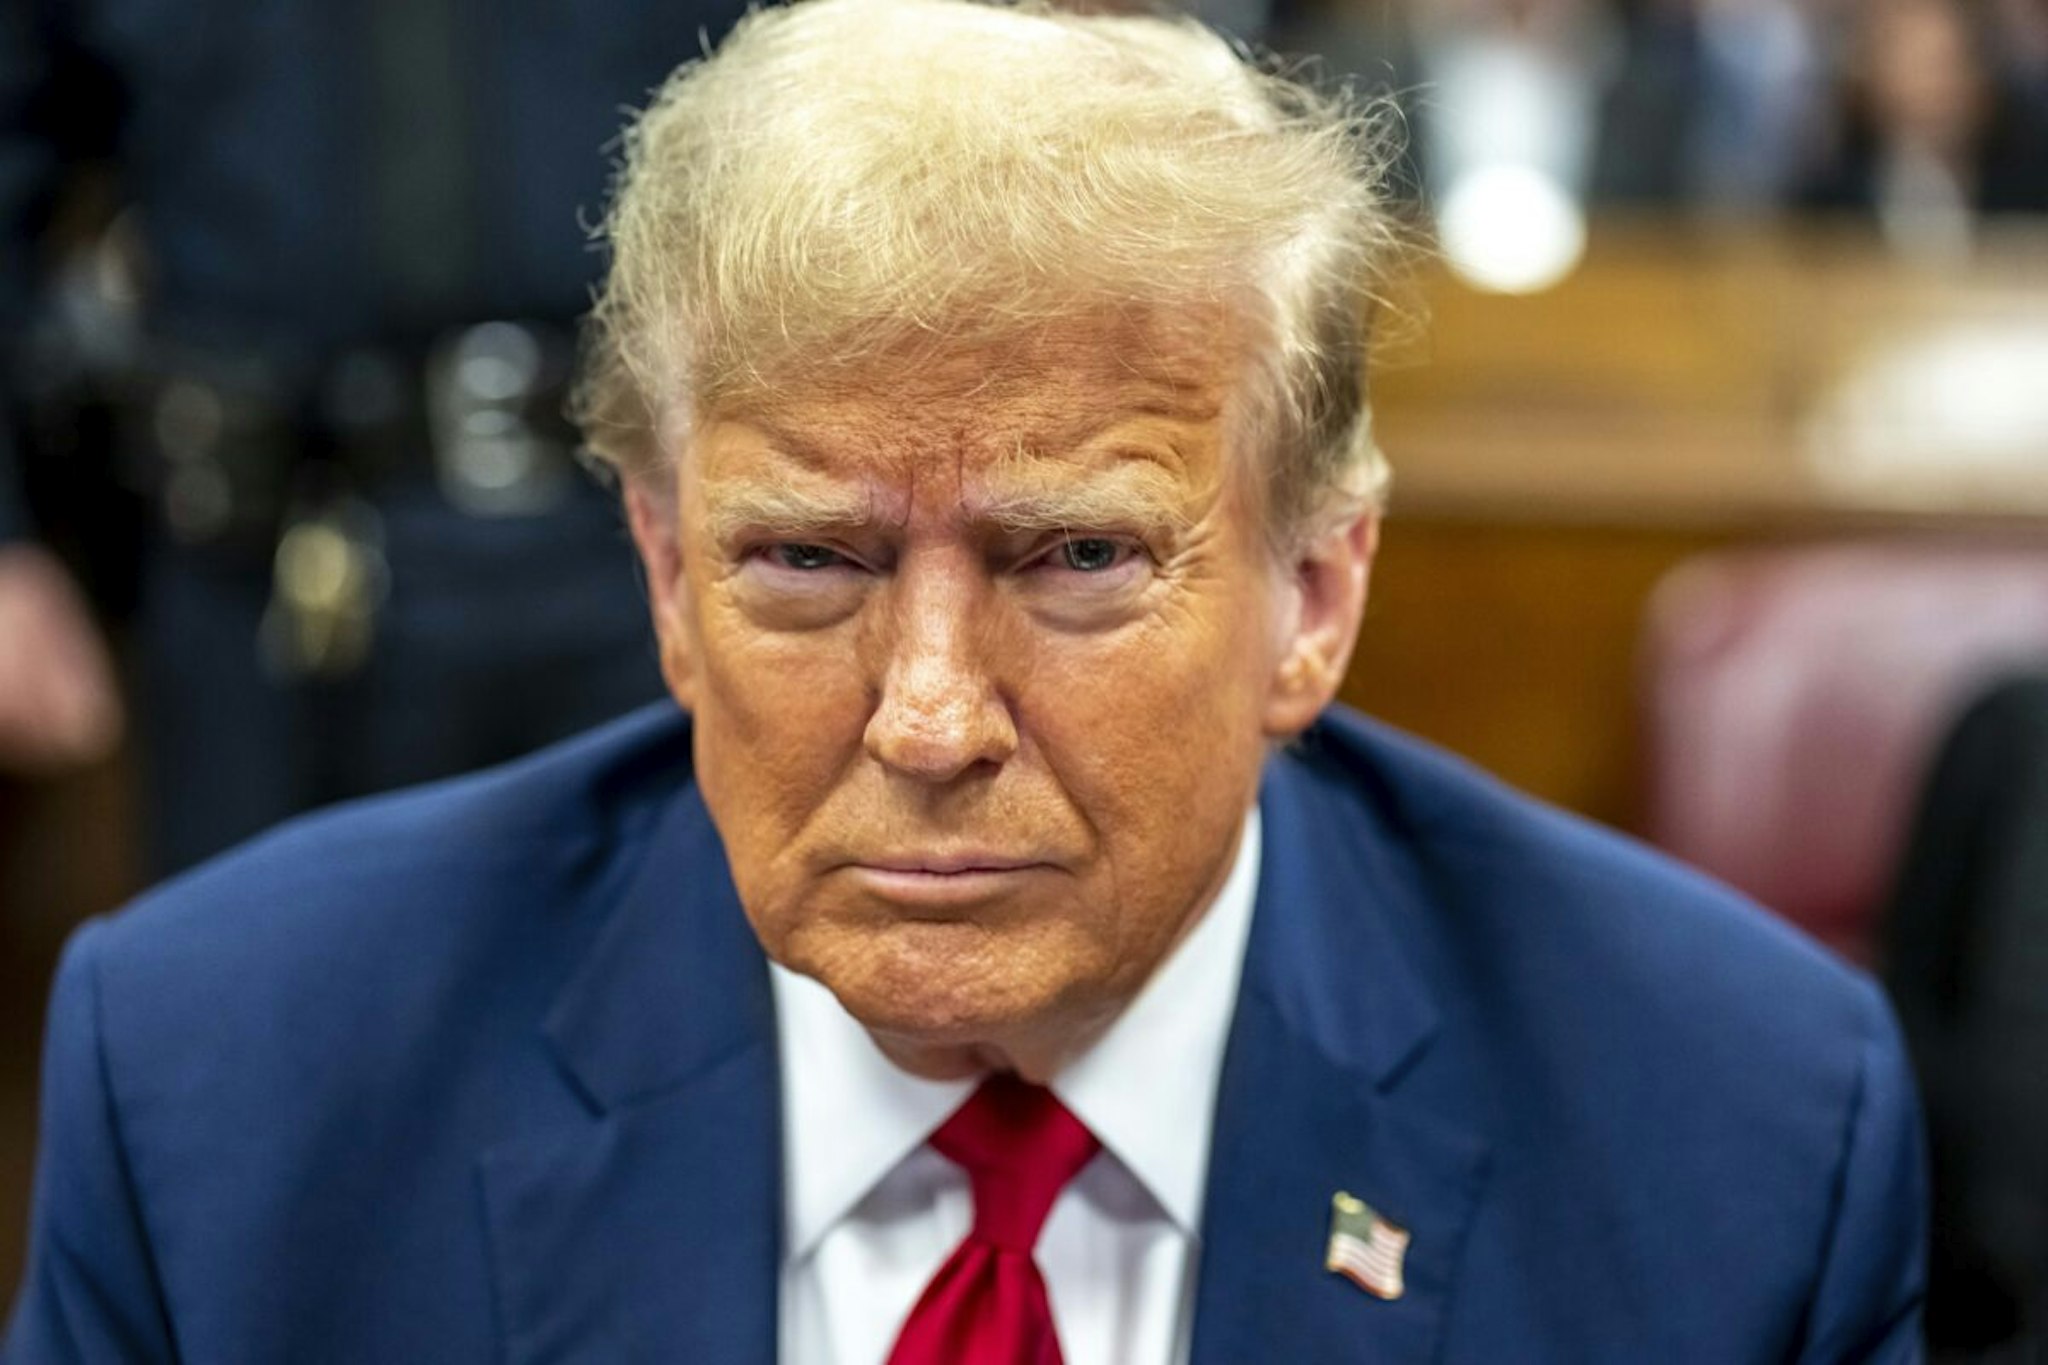 NEW YORK, NEW YORK - APRIL 25: Former U.S. President Donald Trump appears in court during his trial for allegedly covering up hush money payments at Manhattan Criminal Court on April 25, 2024 in New York City. Former U.S. President Donald Trump faces 34 felony counts of falsifying business records in the first of his criminal cases to go to trial.